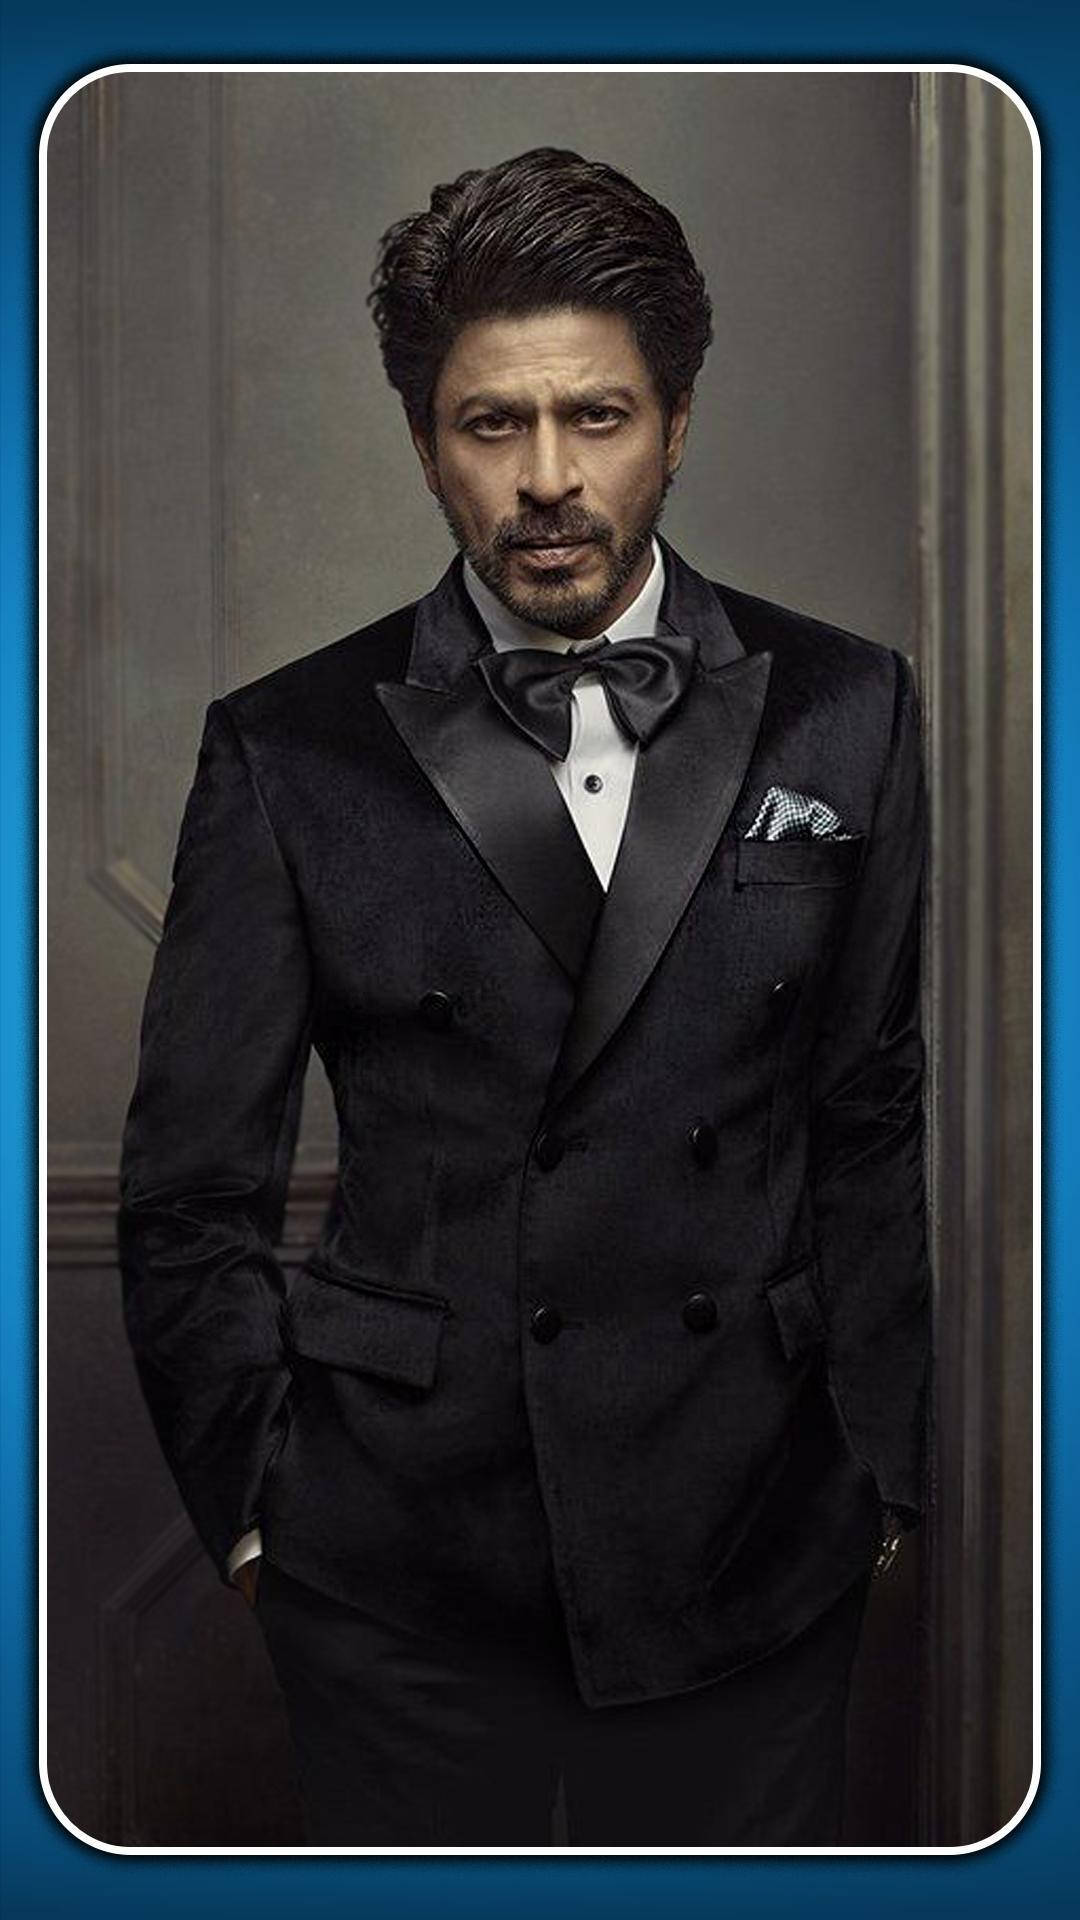 Shahrukh Khan Hd In Formal Suit